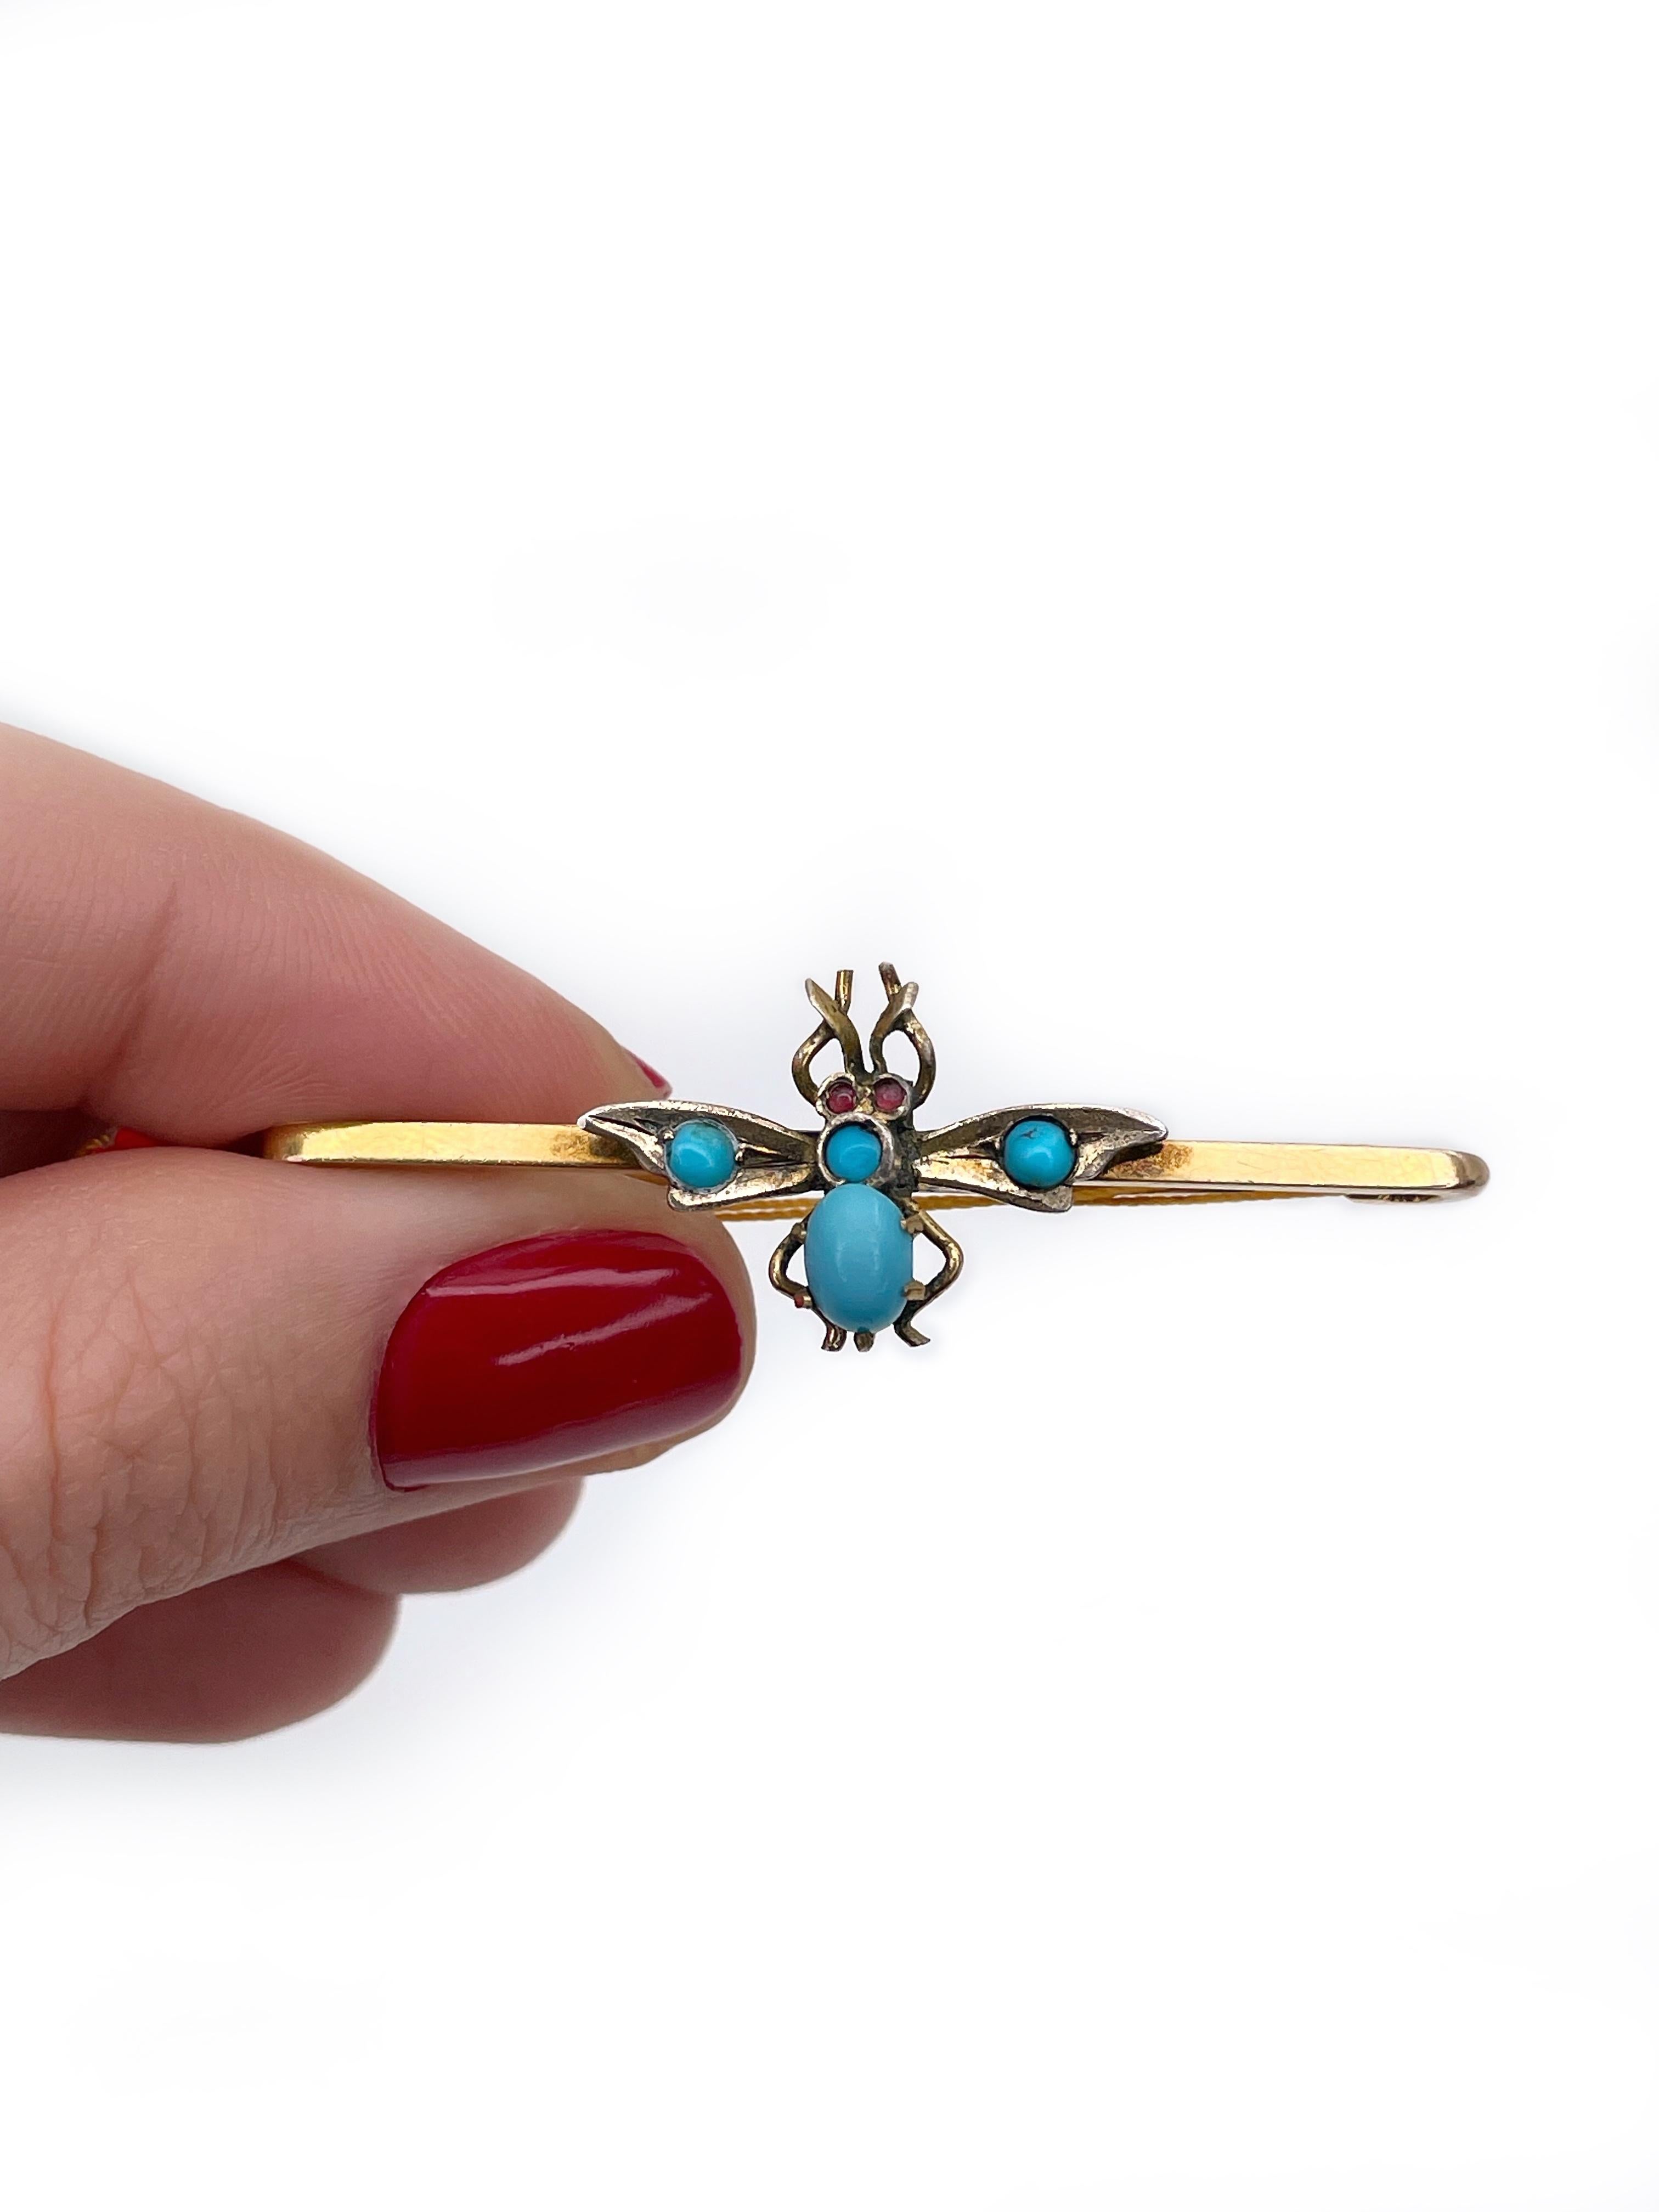 This is a typical Victorian insect jewellery example. It depicts a fly or a bee. The body is composed of cabochon cut turquoises. The eyes are made of small round rubies. The brooch is crafted in 9K yellow gold, the wings are silver plated. 

It is